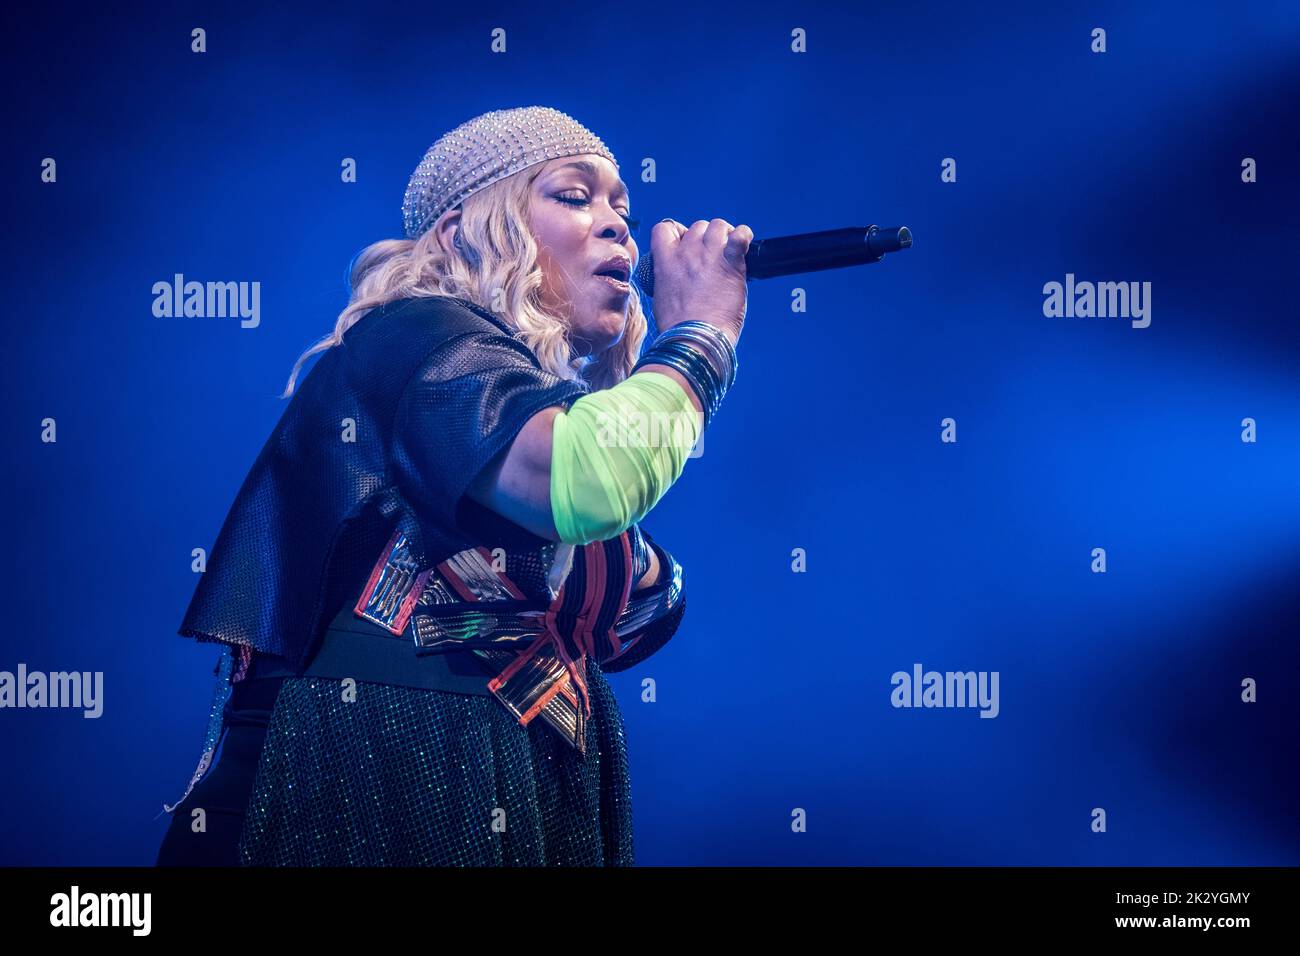 Roskilde, Denmark. 30th, June 2022. The American R&B group TLC performs a live concert during the Danish music festival Roskilde Festival 2022 in Roskilde. Here singer T-Boz is seen live on stage. (Photo credit: Gonzales Photo - Thomas Rasmussen). Stock Photo